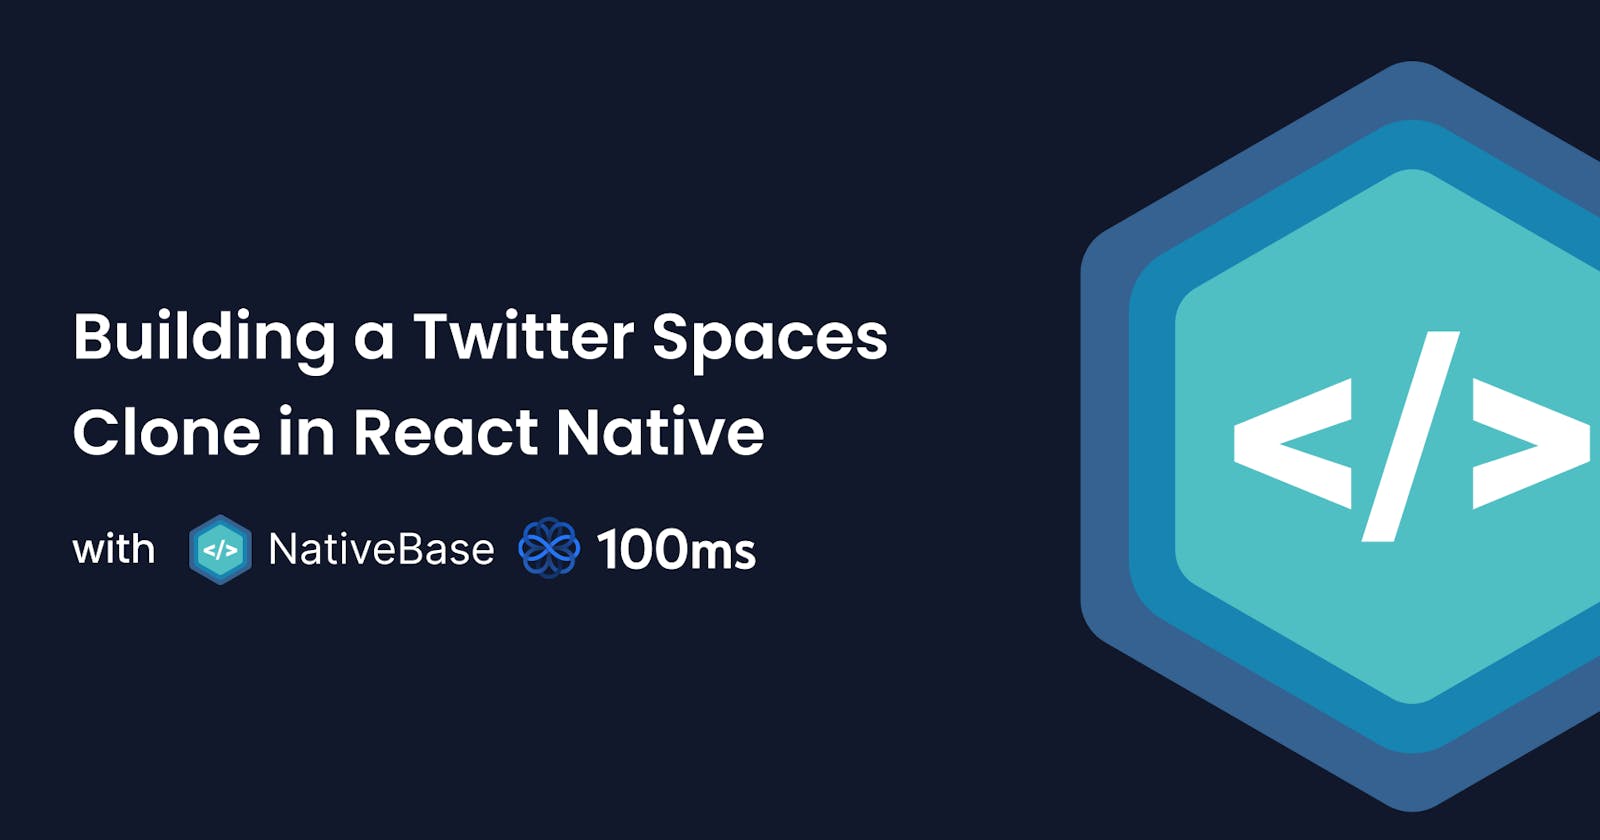 Building a Twitter Spaces Clone with NativeBase and 100ms